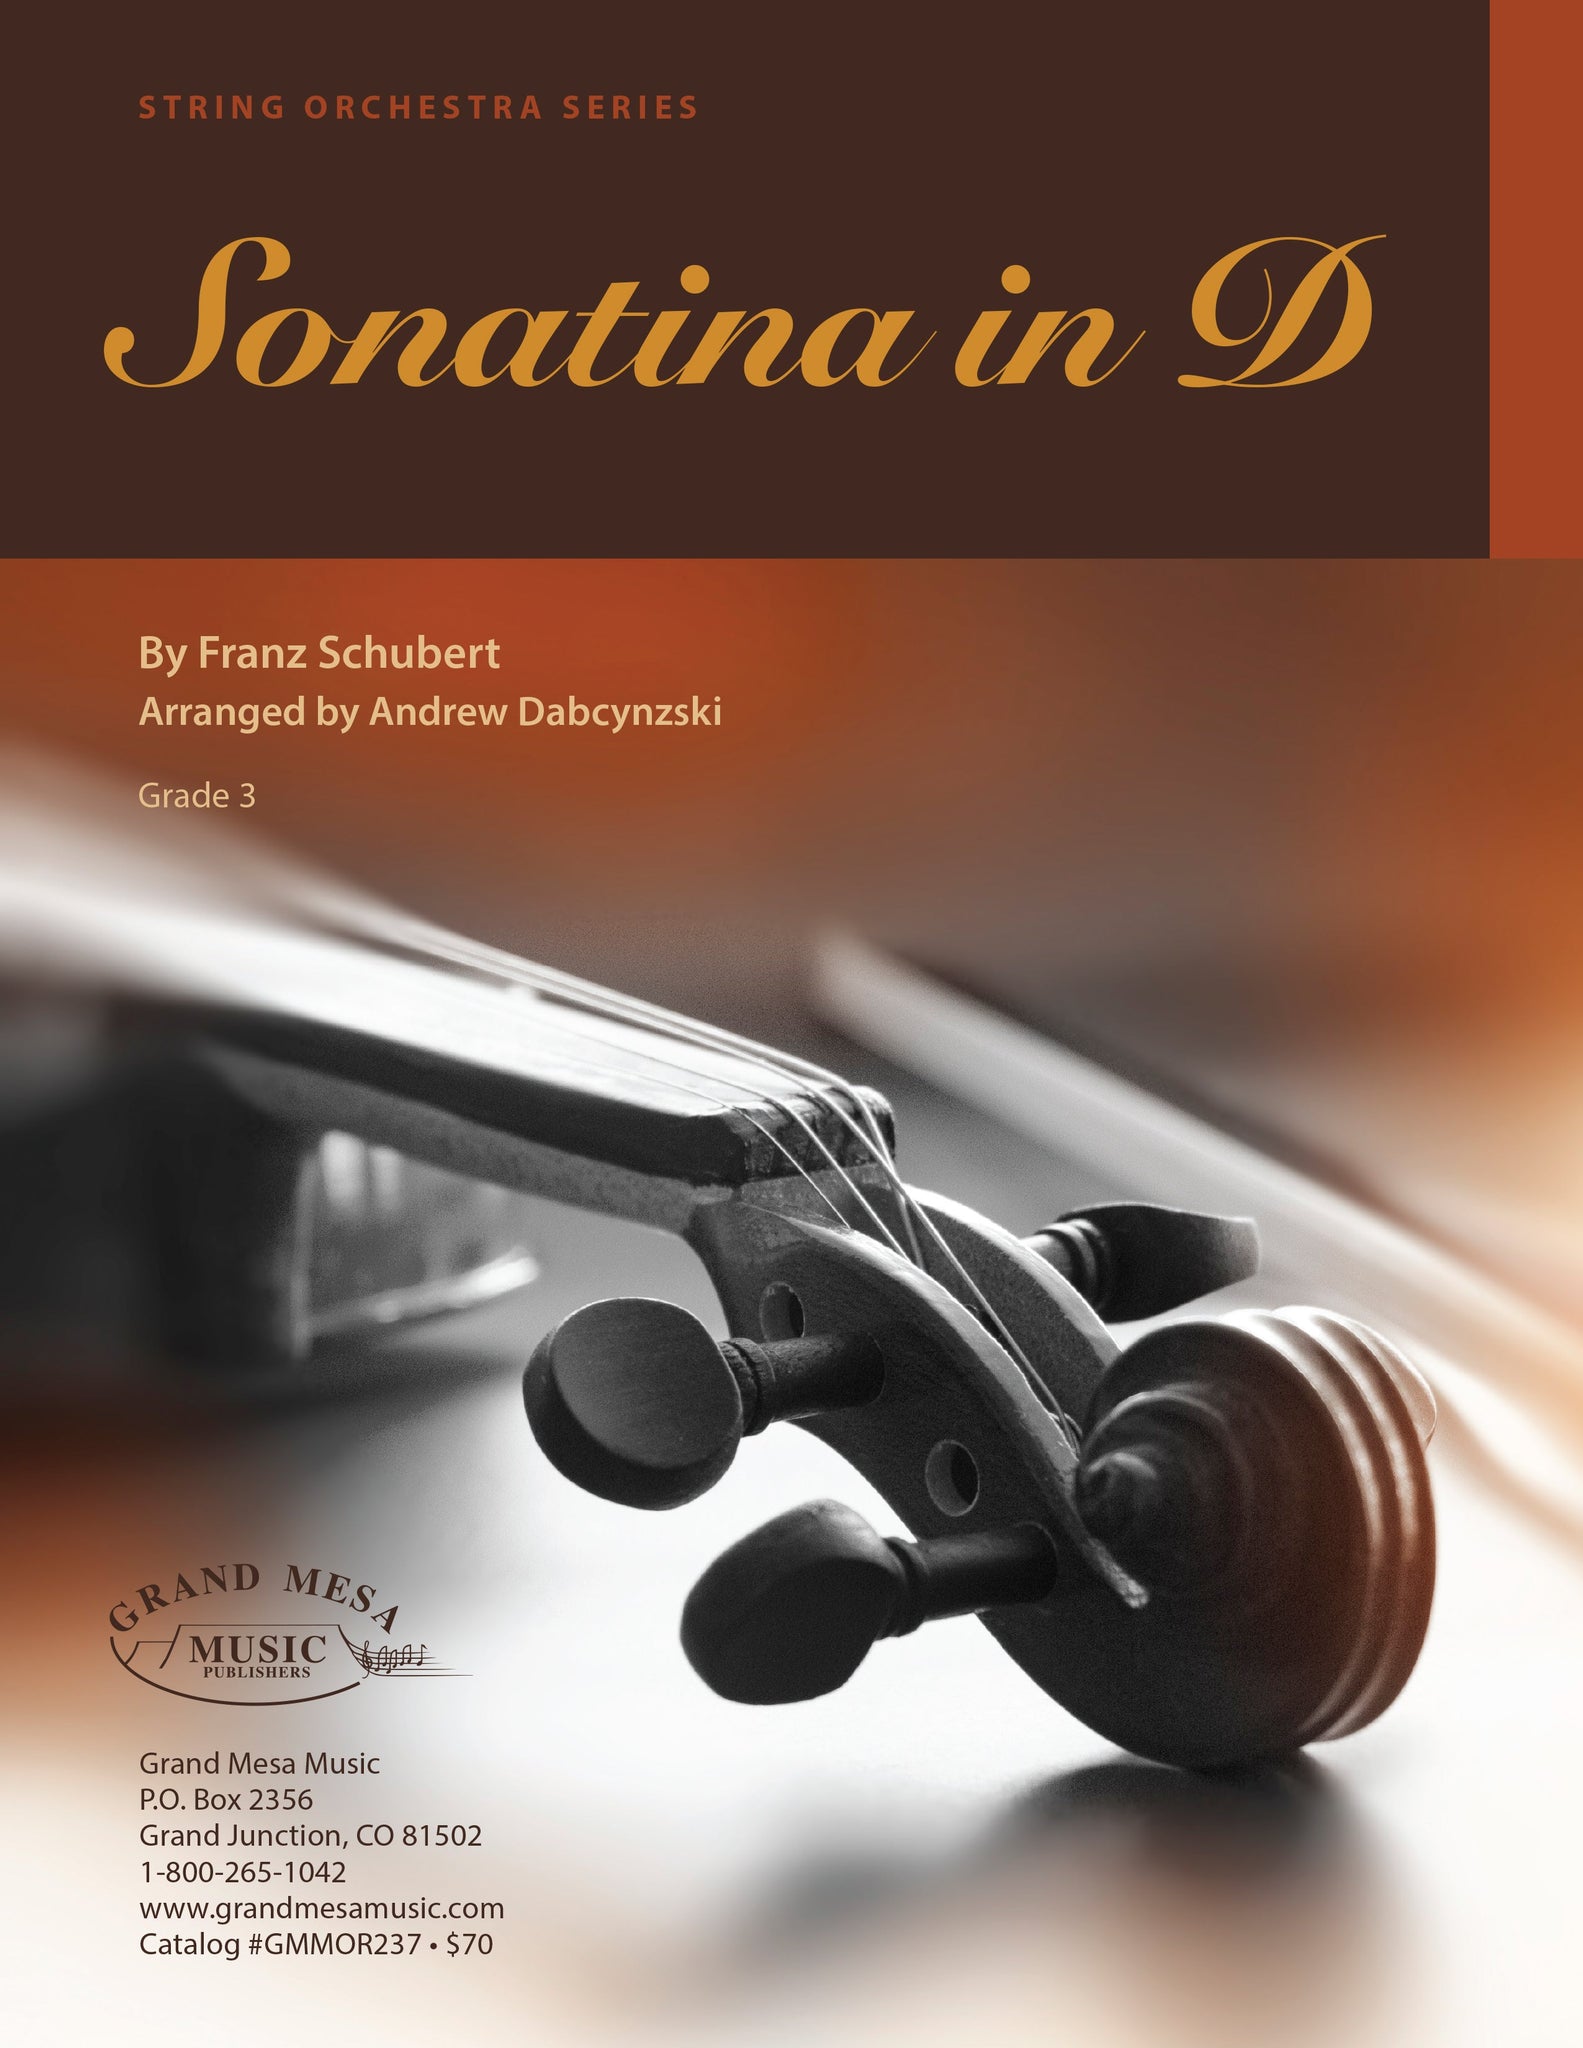 Strings sheet music cover of Sonatina in D, composed by Franz Schubert, arranged by Andrew Dabcyznski.